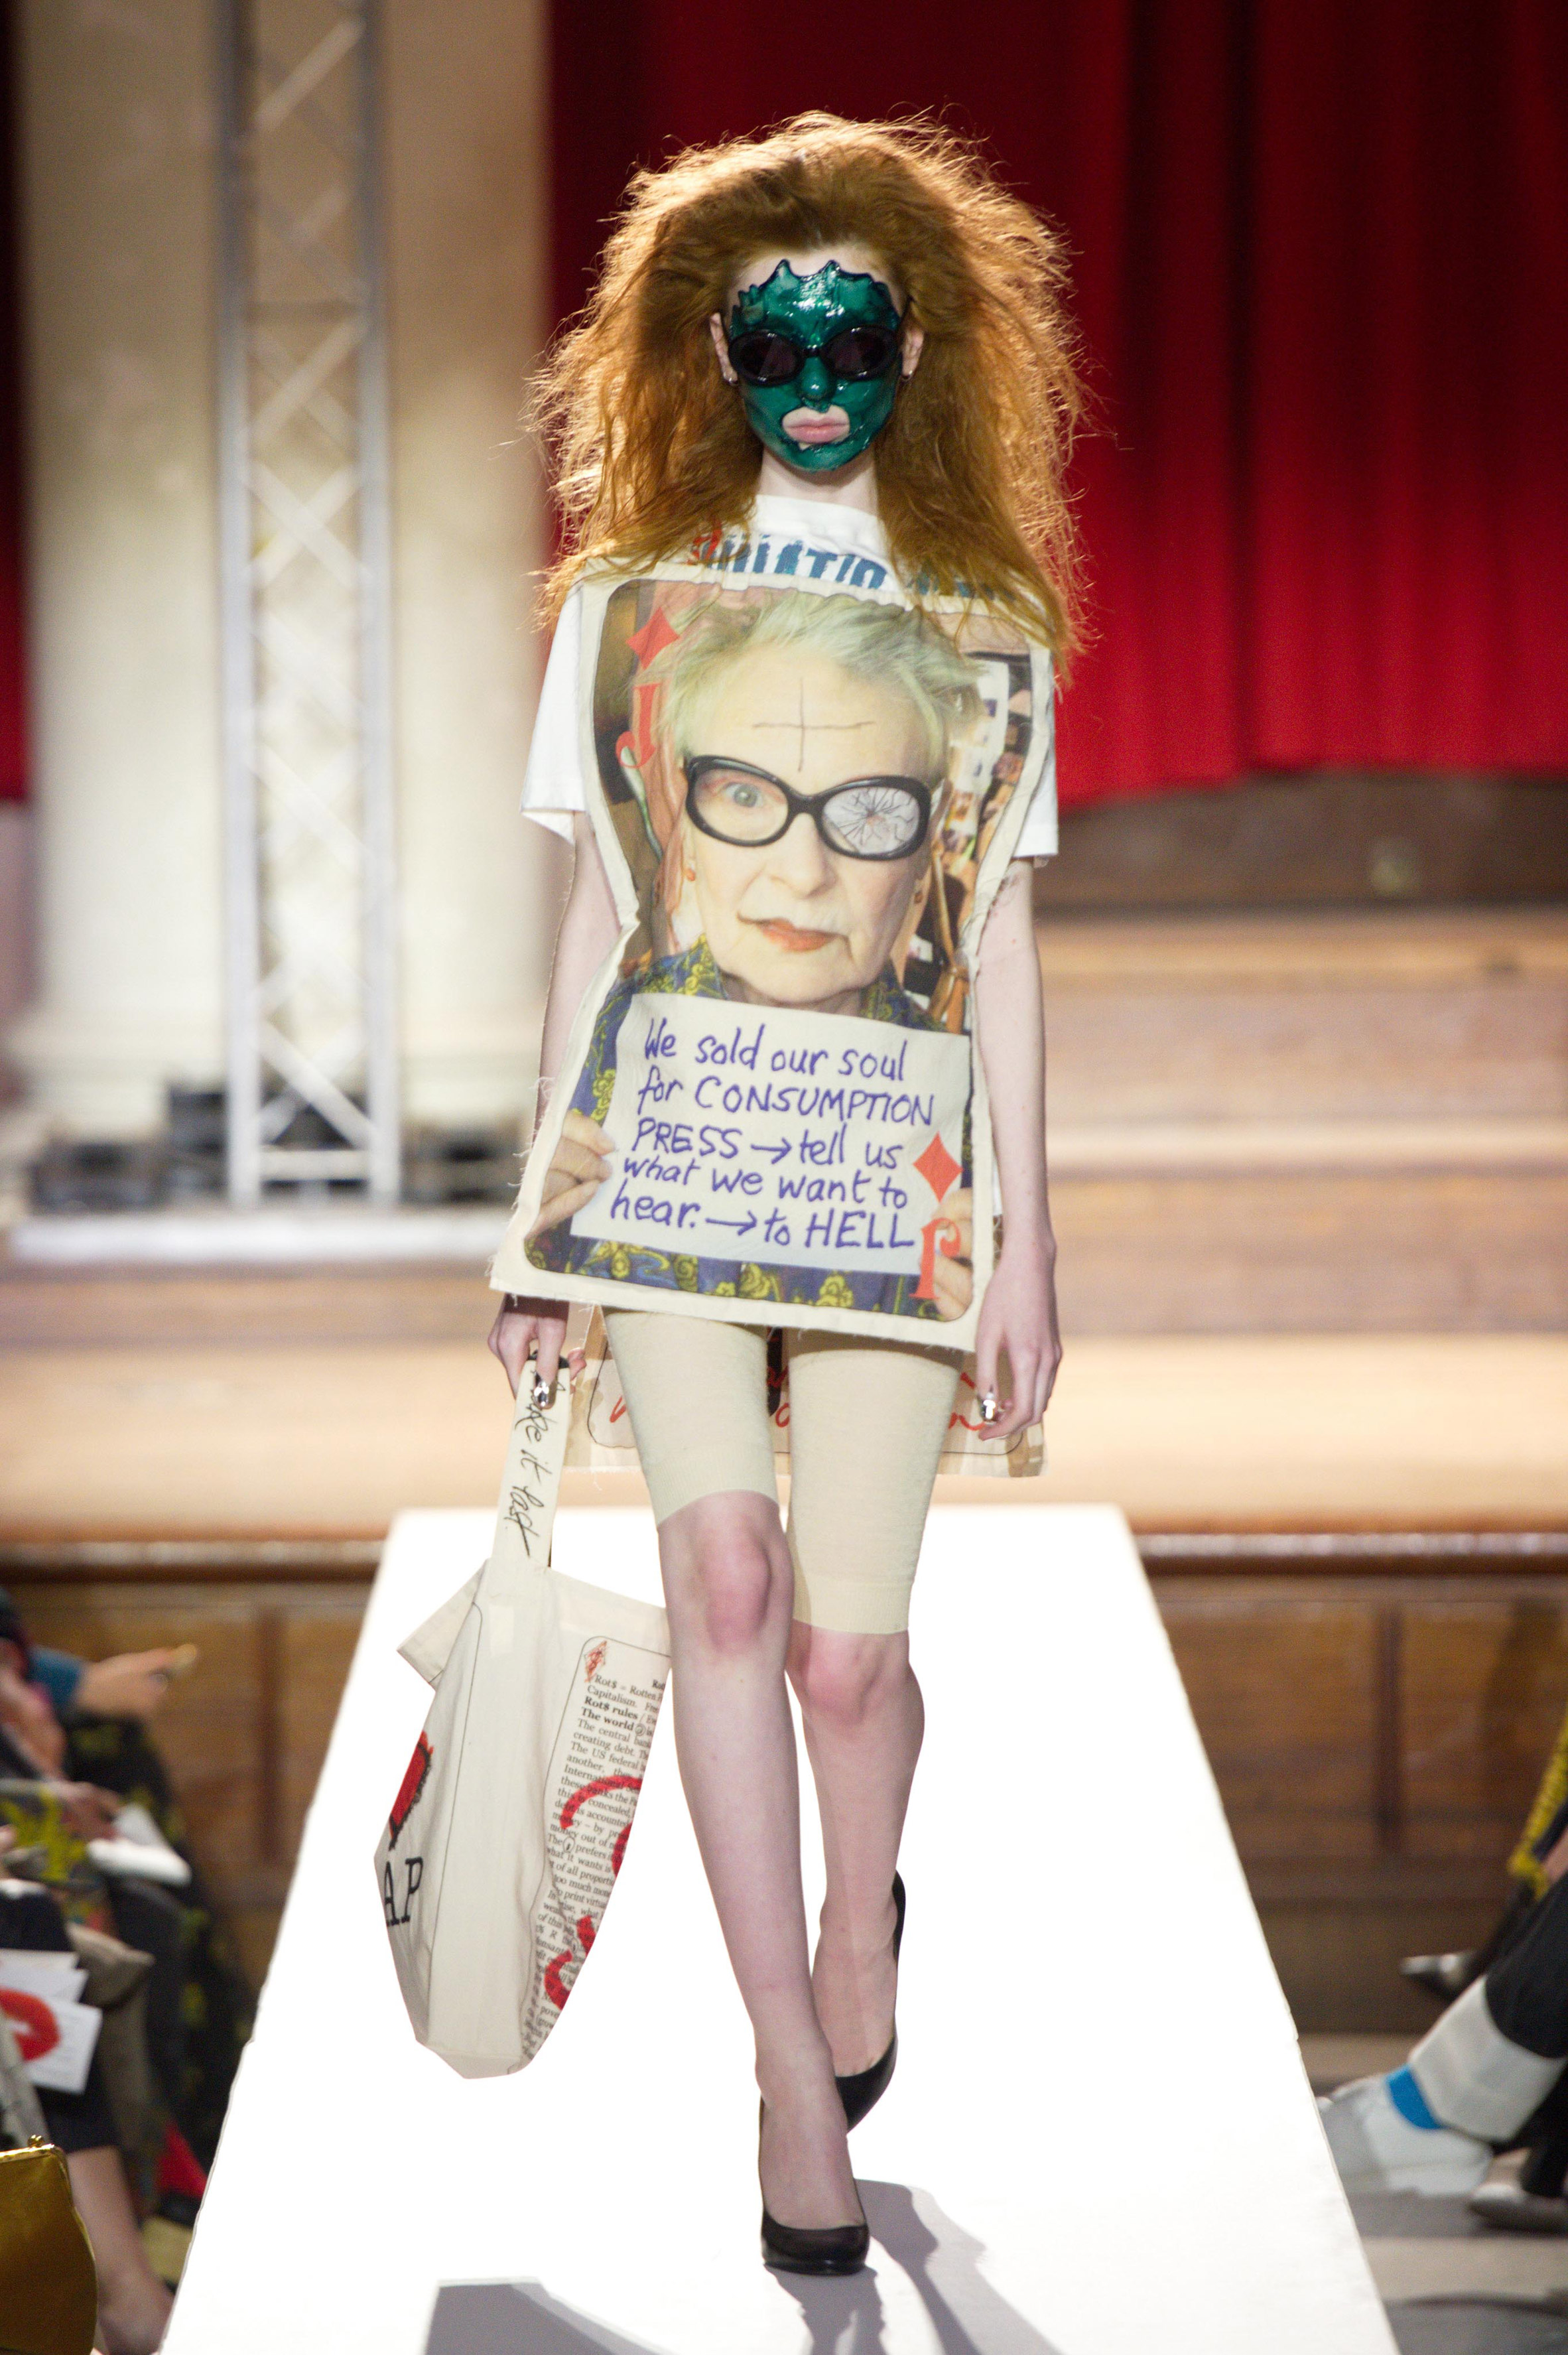 Why Vivienne Westwood still rules